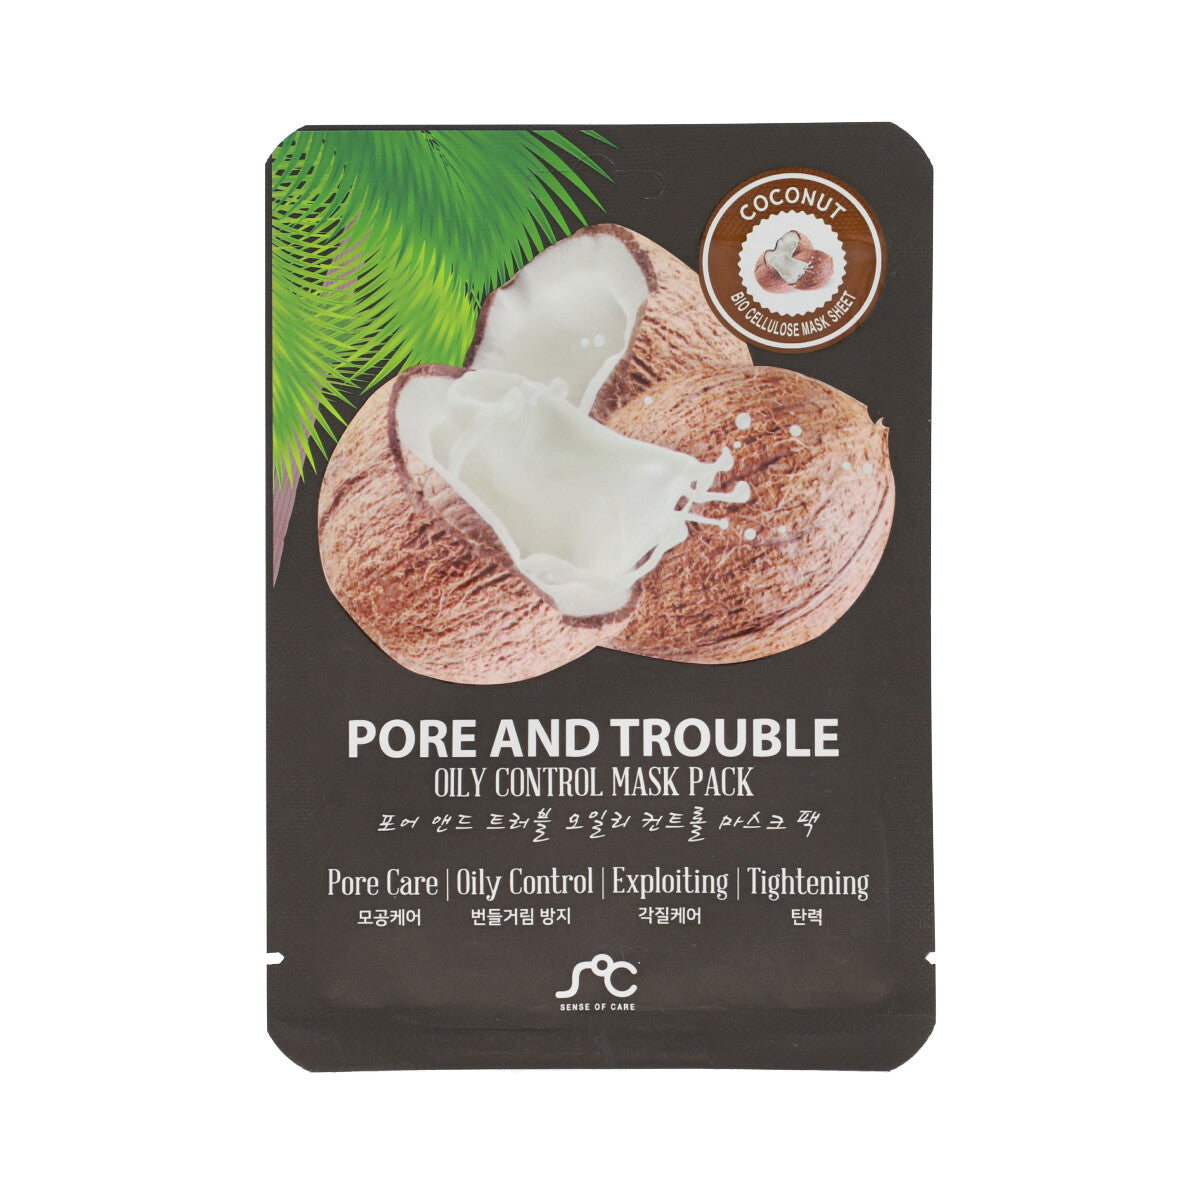 Pore and Trouble Mask